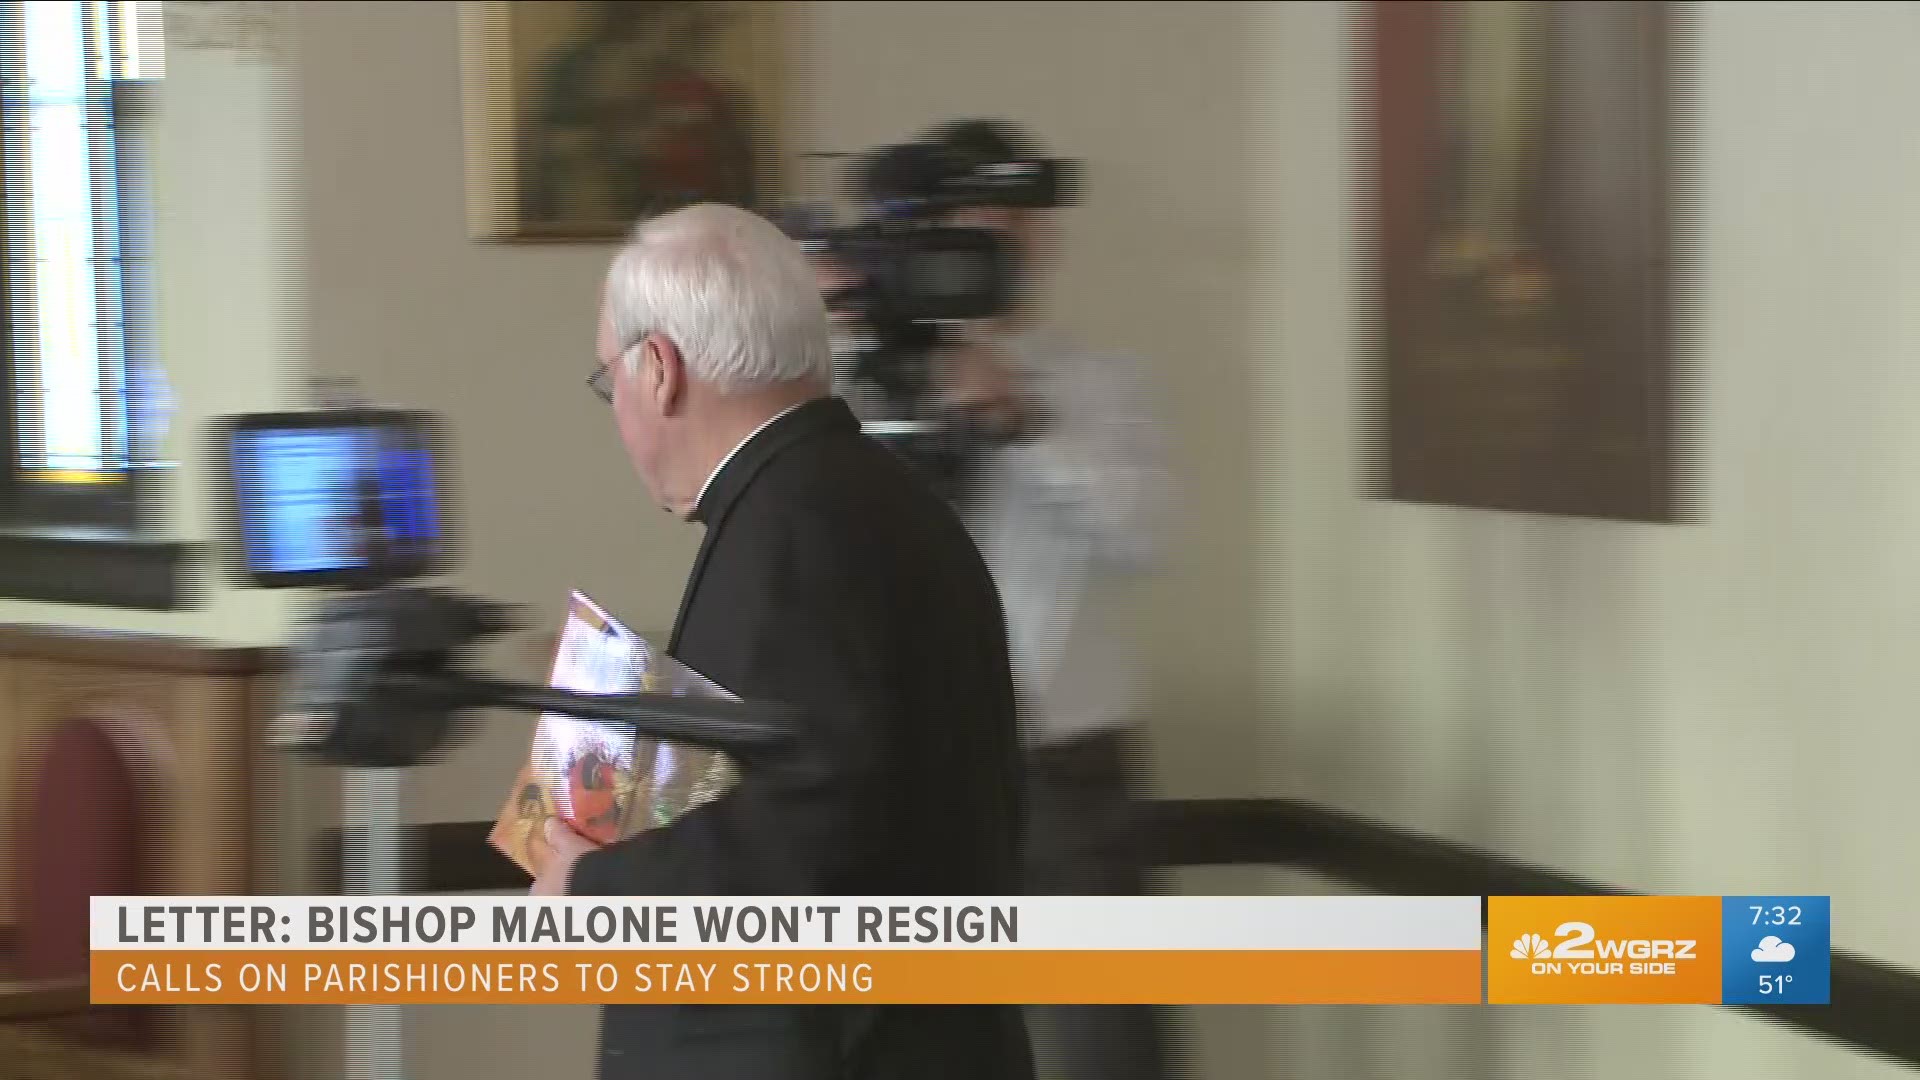 Letter: Bishop Malone will not resign